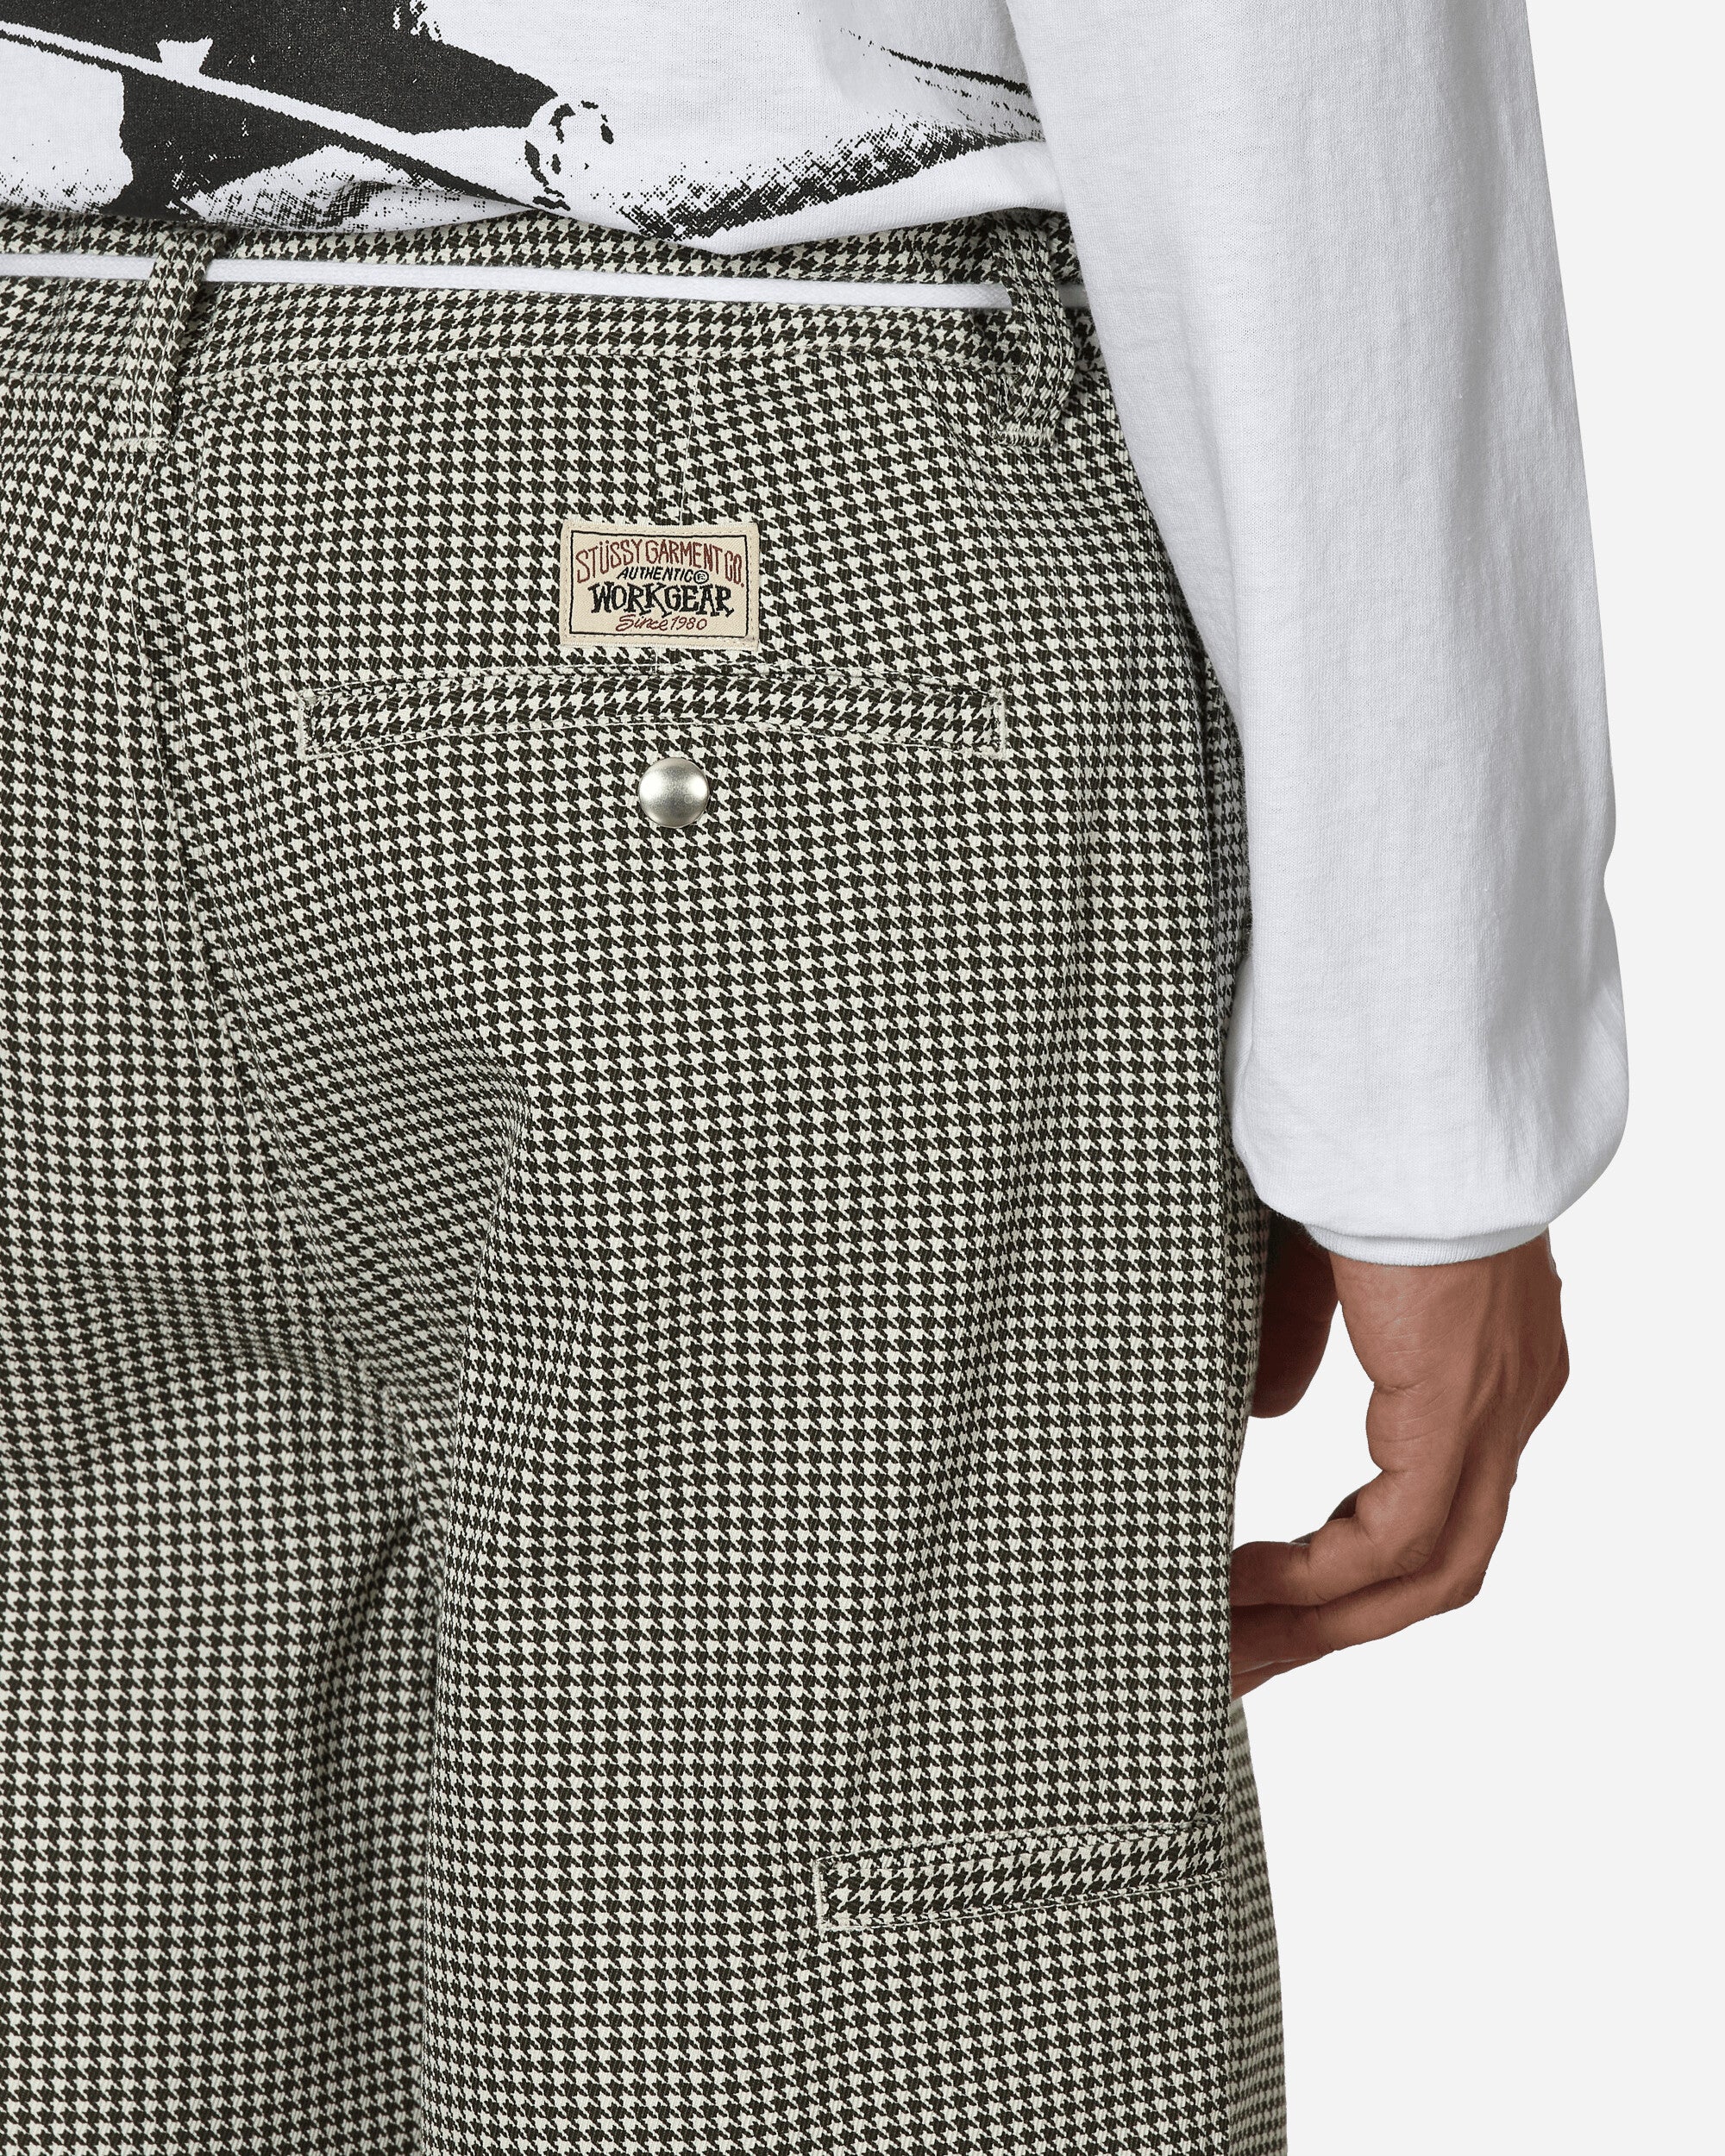 Stüssy Workgear Trouser Twill Houndstooth Pants Casual 116625 2444